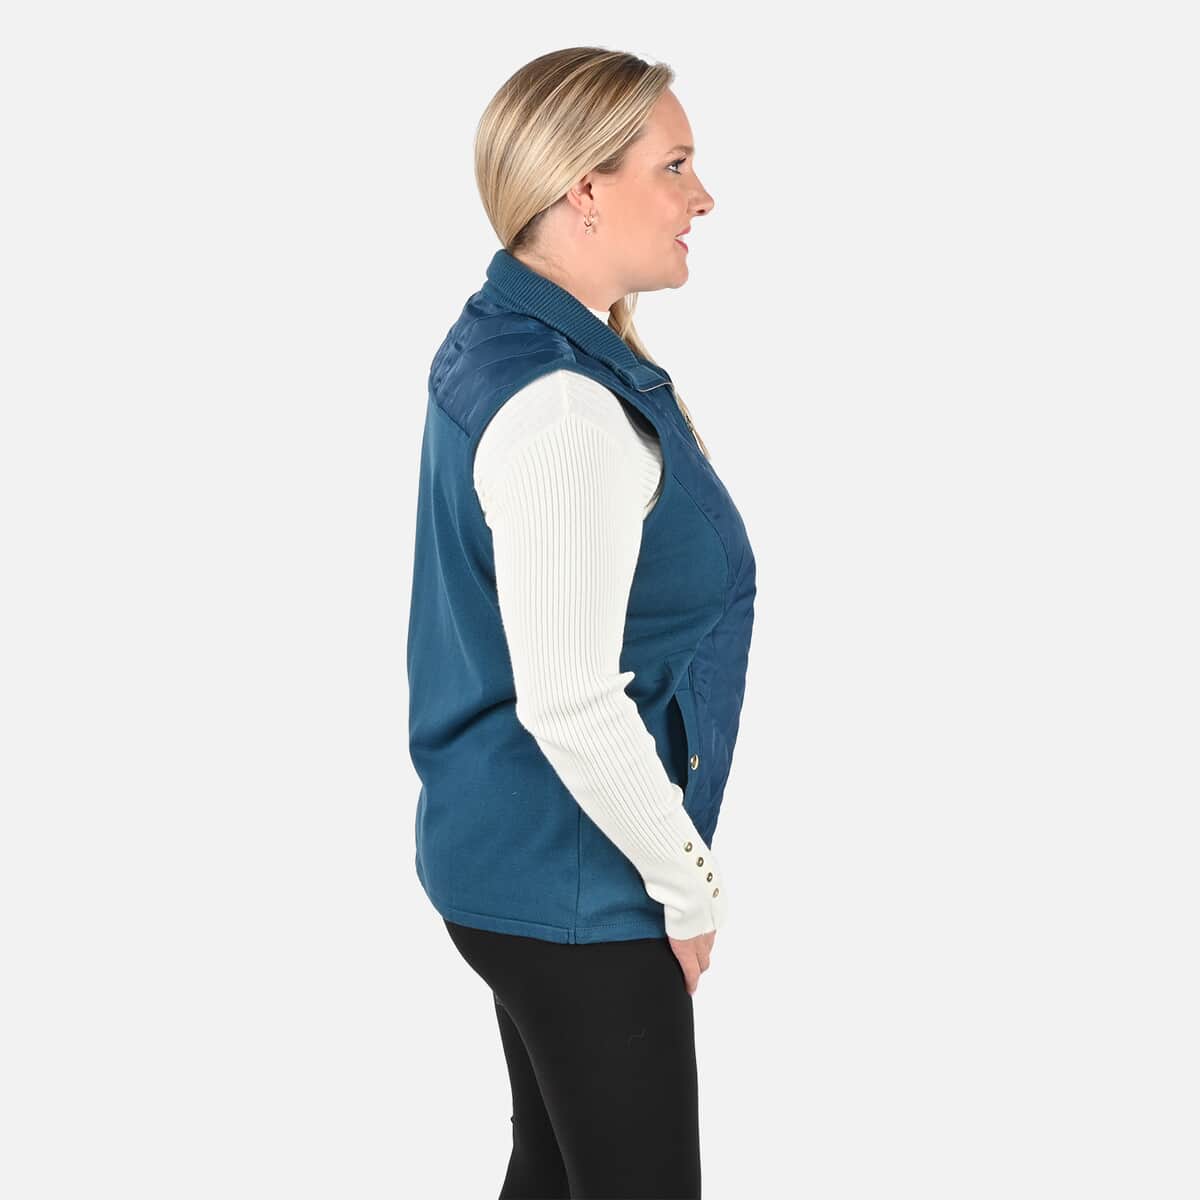 Tamsy Teal Quilted Knit Zip Front Vest - Large image number 2